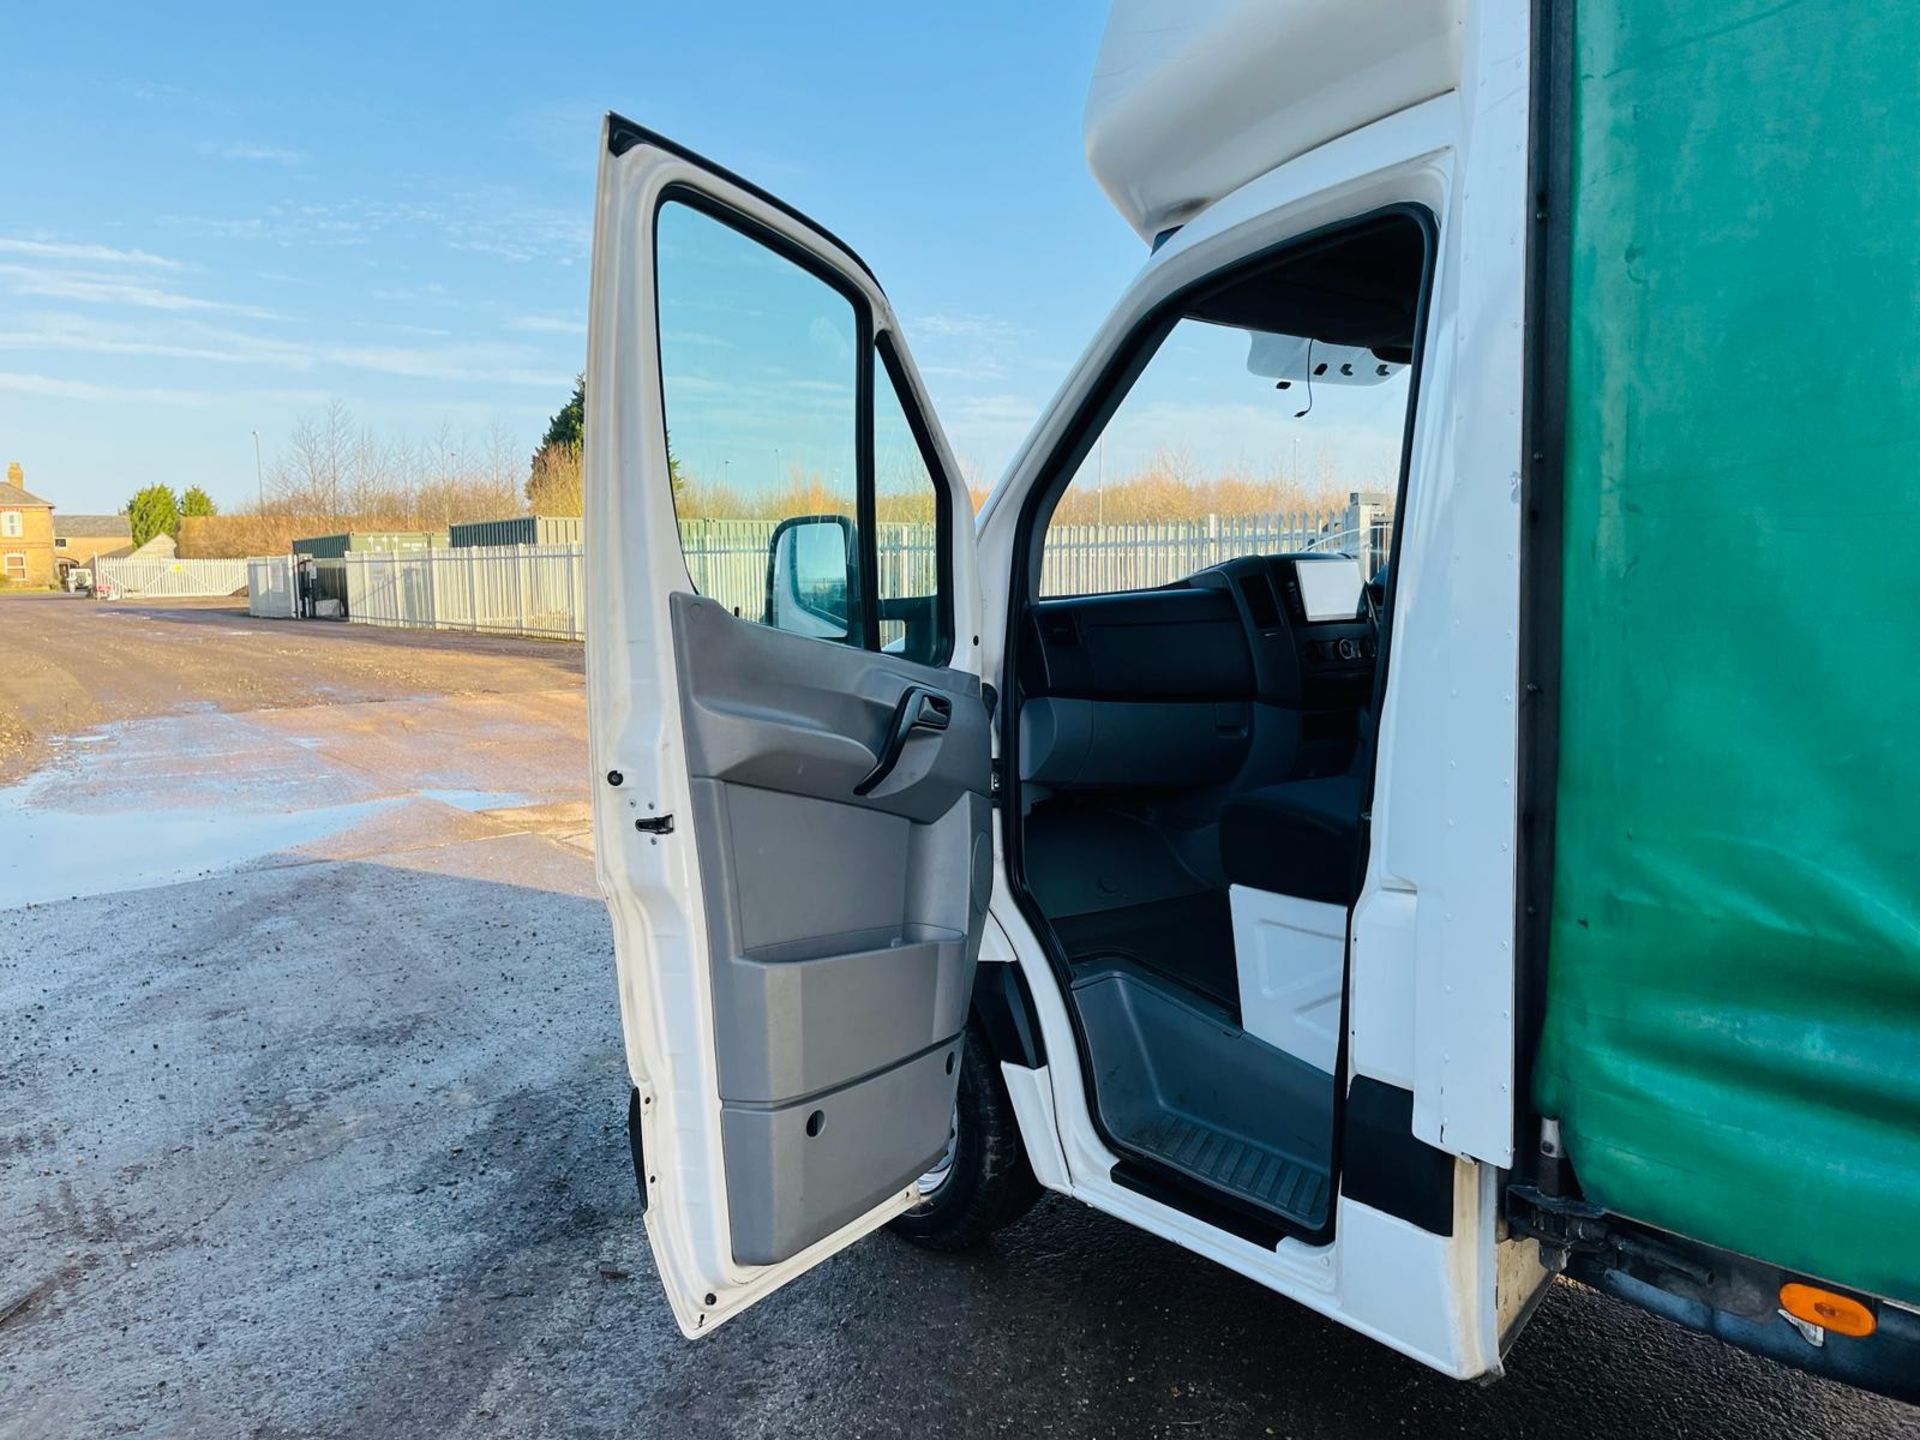 ** ON SALE ** Volkswagen Crafter Curtain Side 2.0L TDI 109 L3 H1 - 2011 '61 Reg'- Air Conditioning - Image 18 of 24